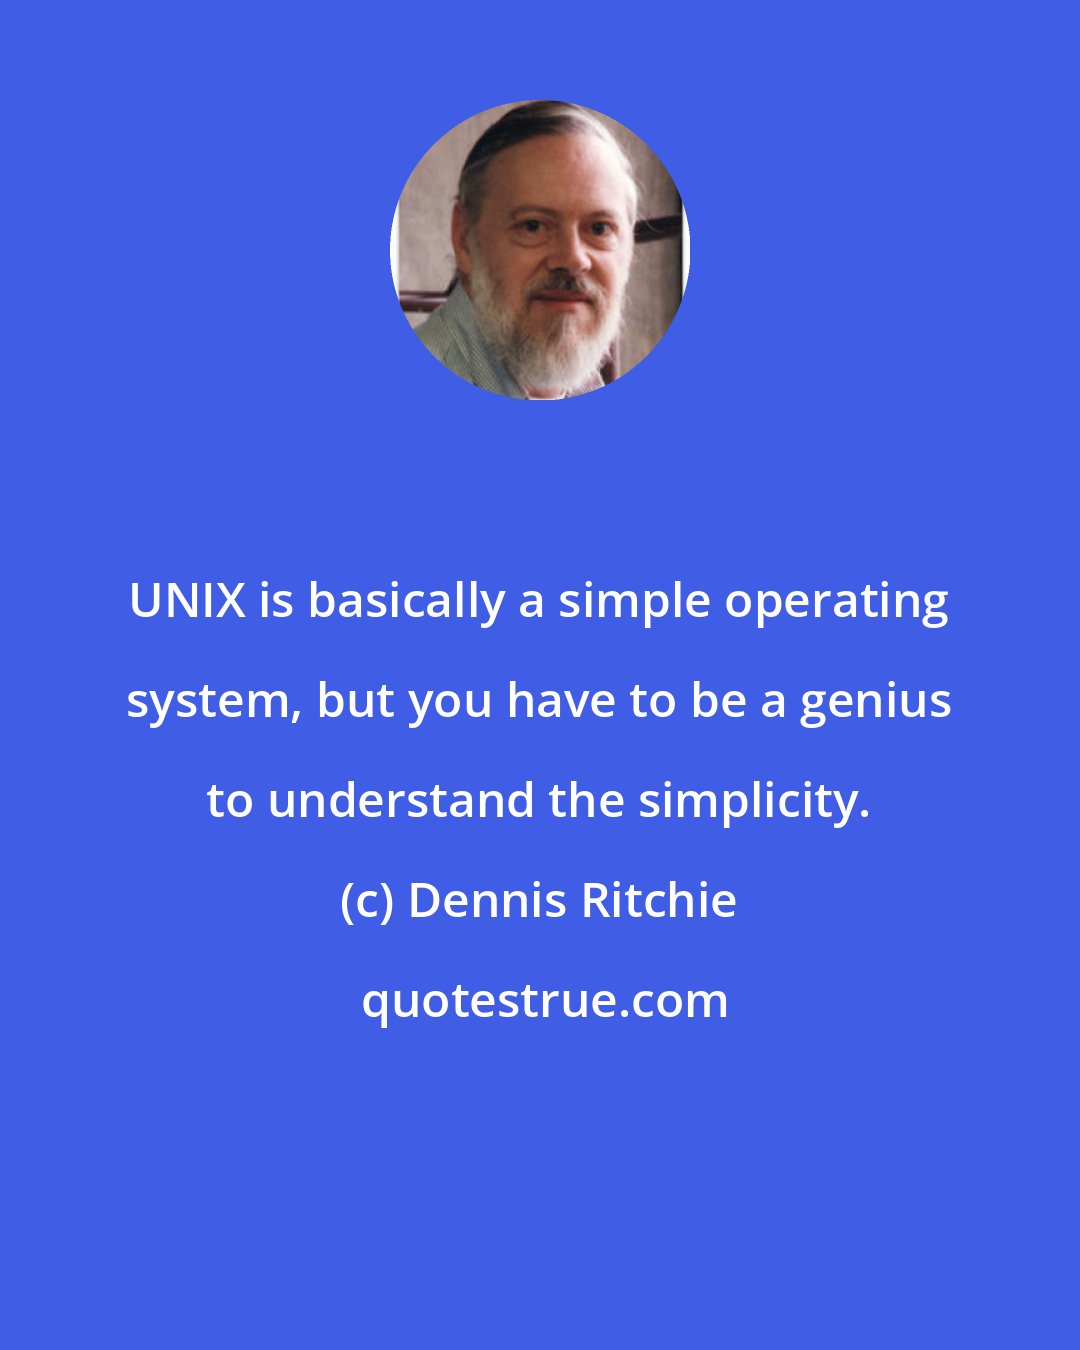 Dennis Ritchie: UNIX is basically a simple operating system, but you have to be a genius to understand the simplicity.